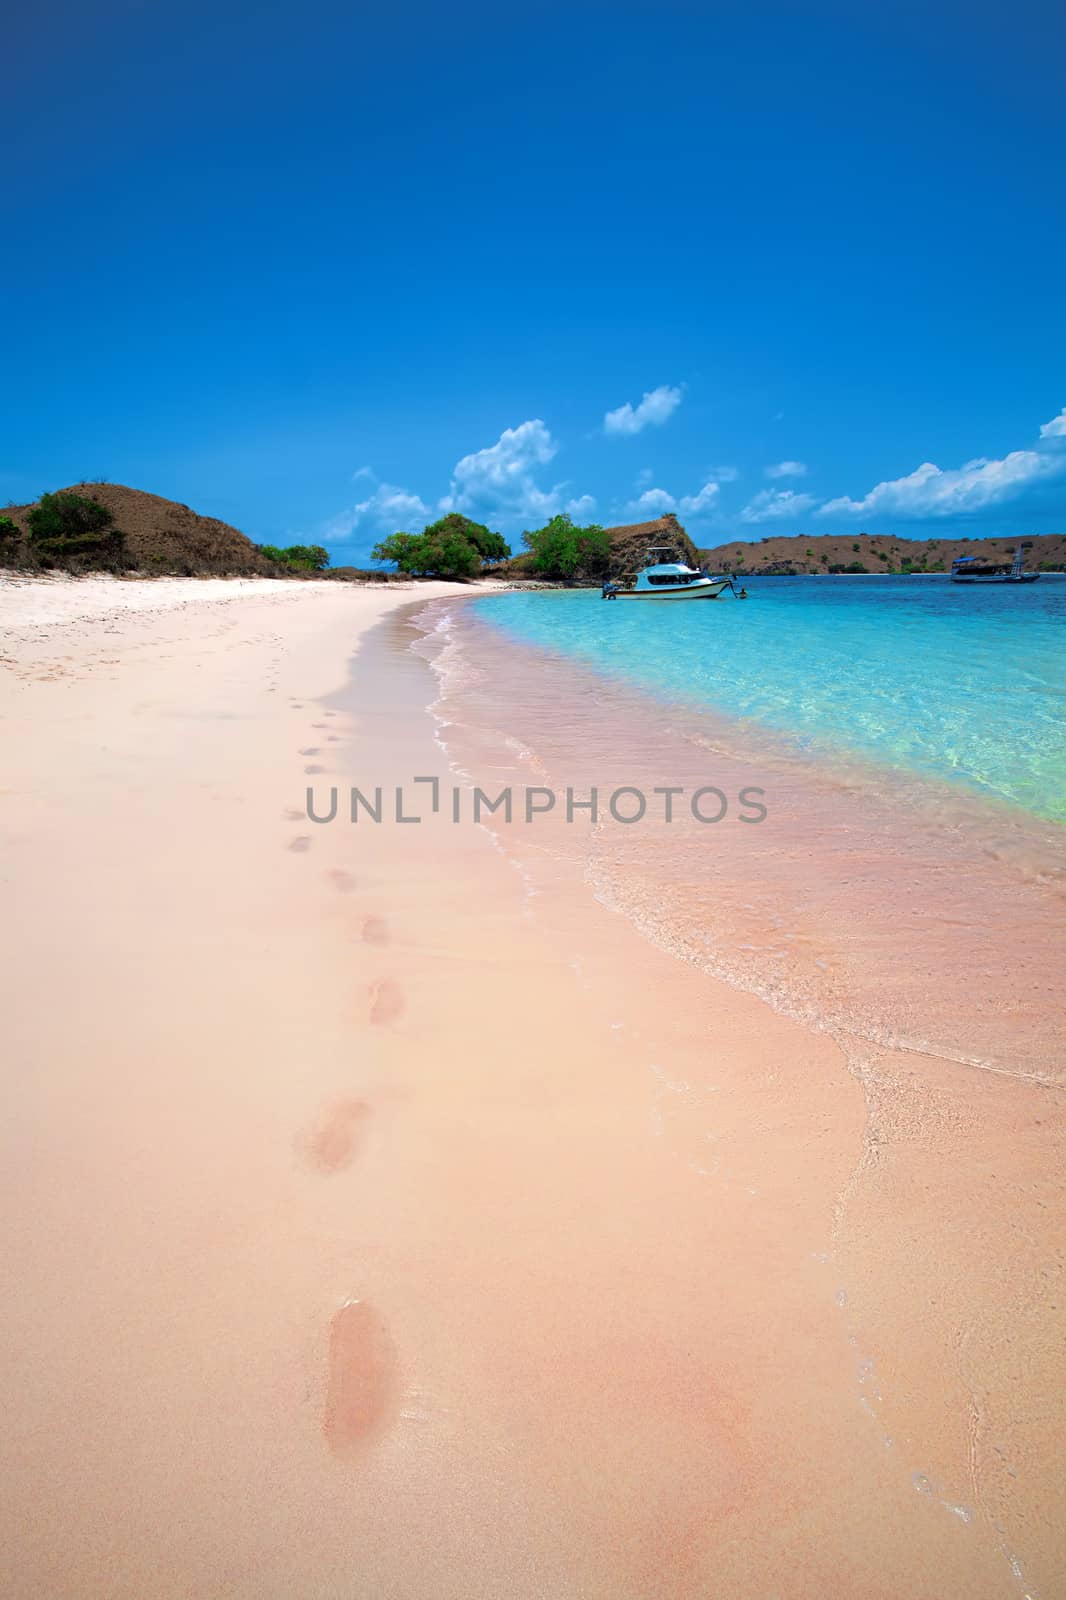 Sunny day on Pink Beach in Komodo National Park